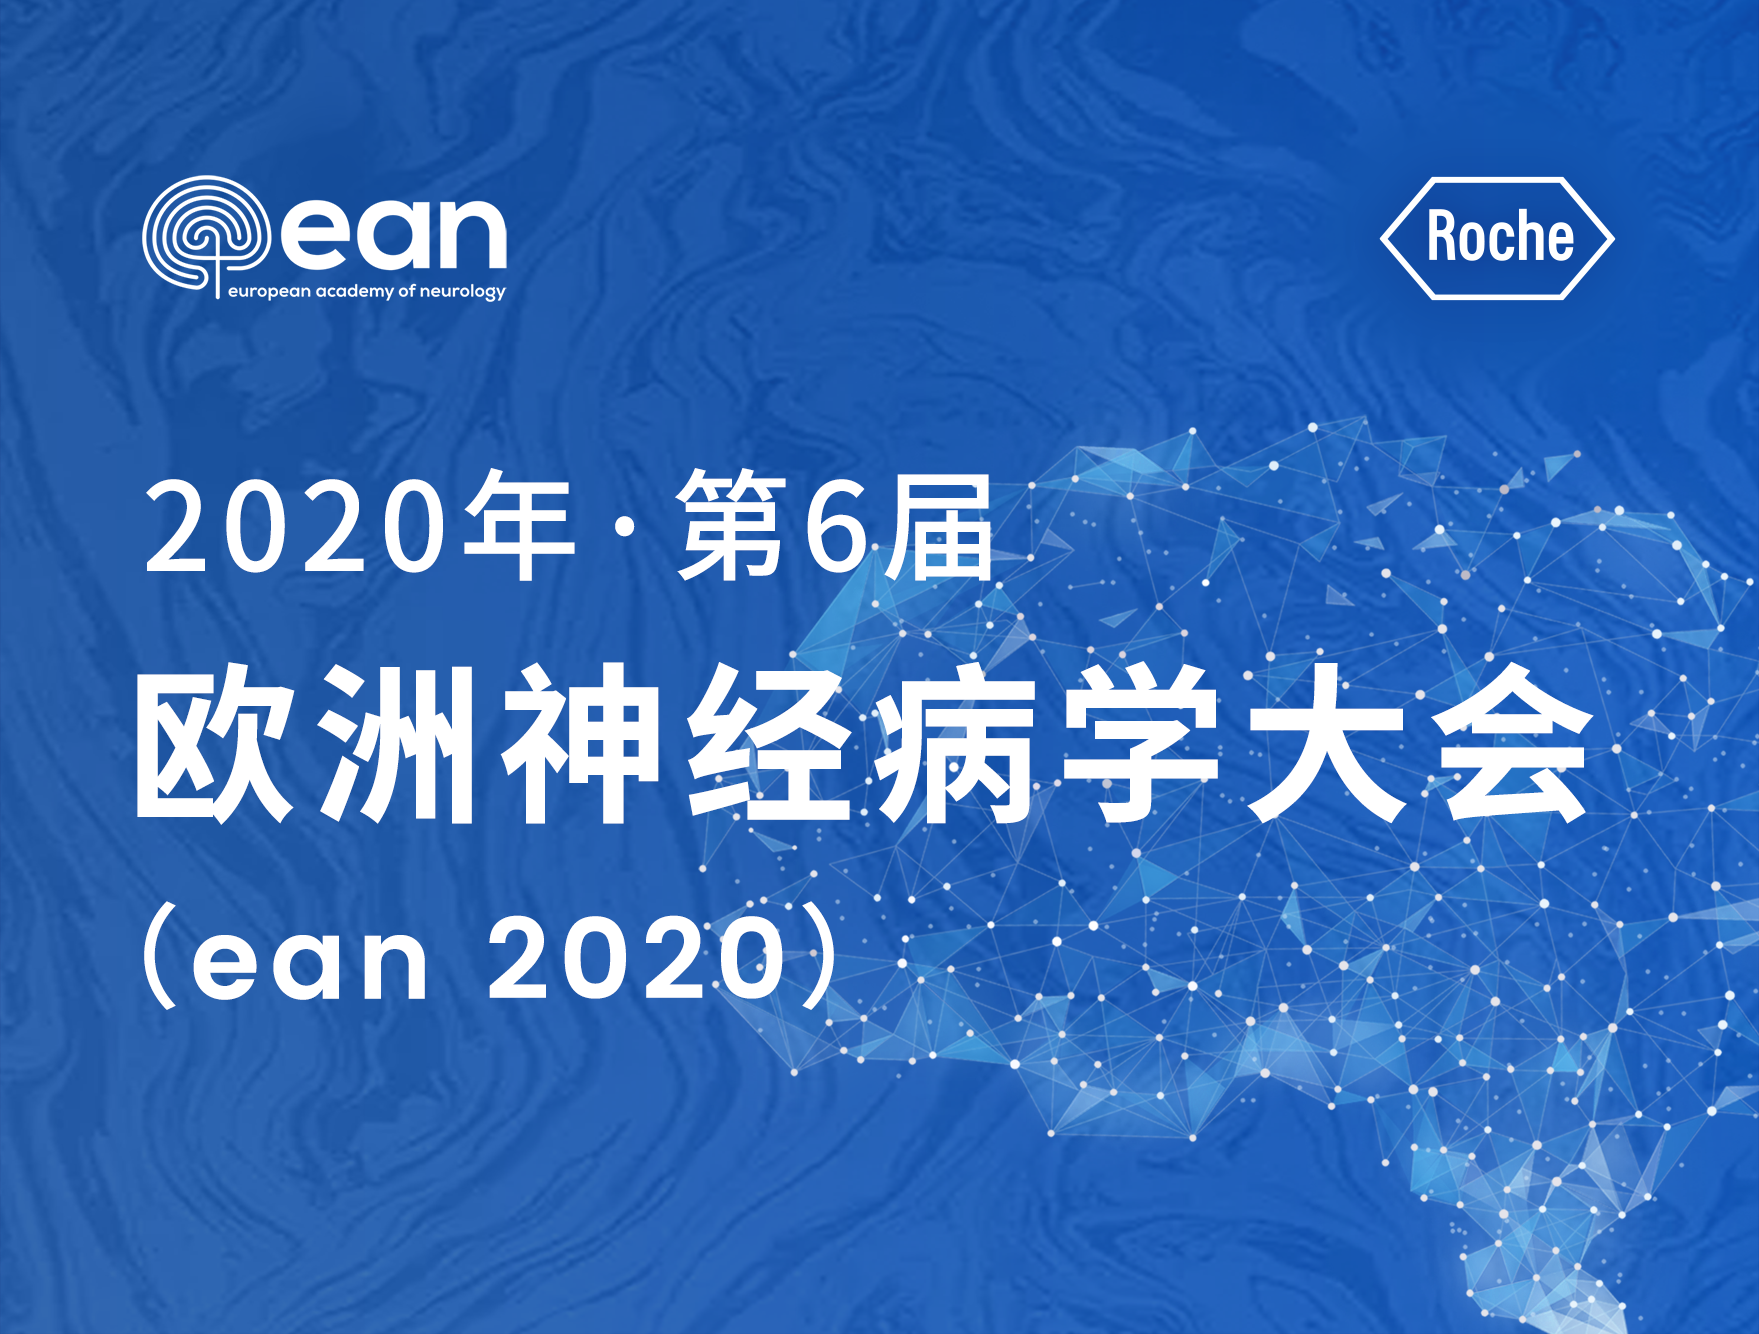 2020 EAN丨聚焦<font color="red">脊髓</font><font color="red">性</font><font color="red">肌萎缩</font><font color="red">症</font>（SMA）治疗期望，共同推进全球SMA诊疗发展